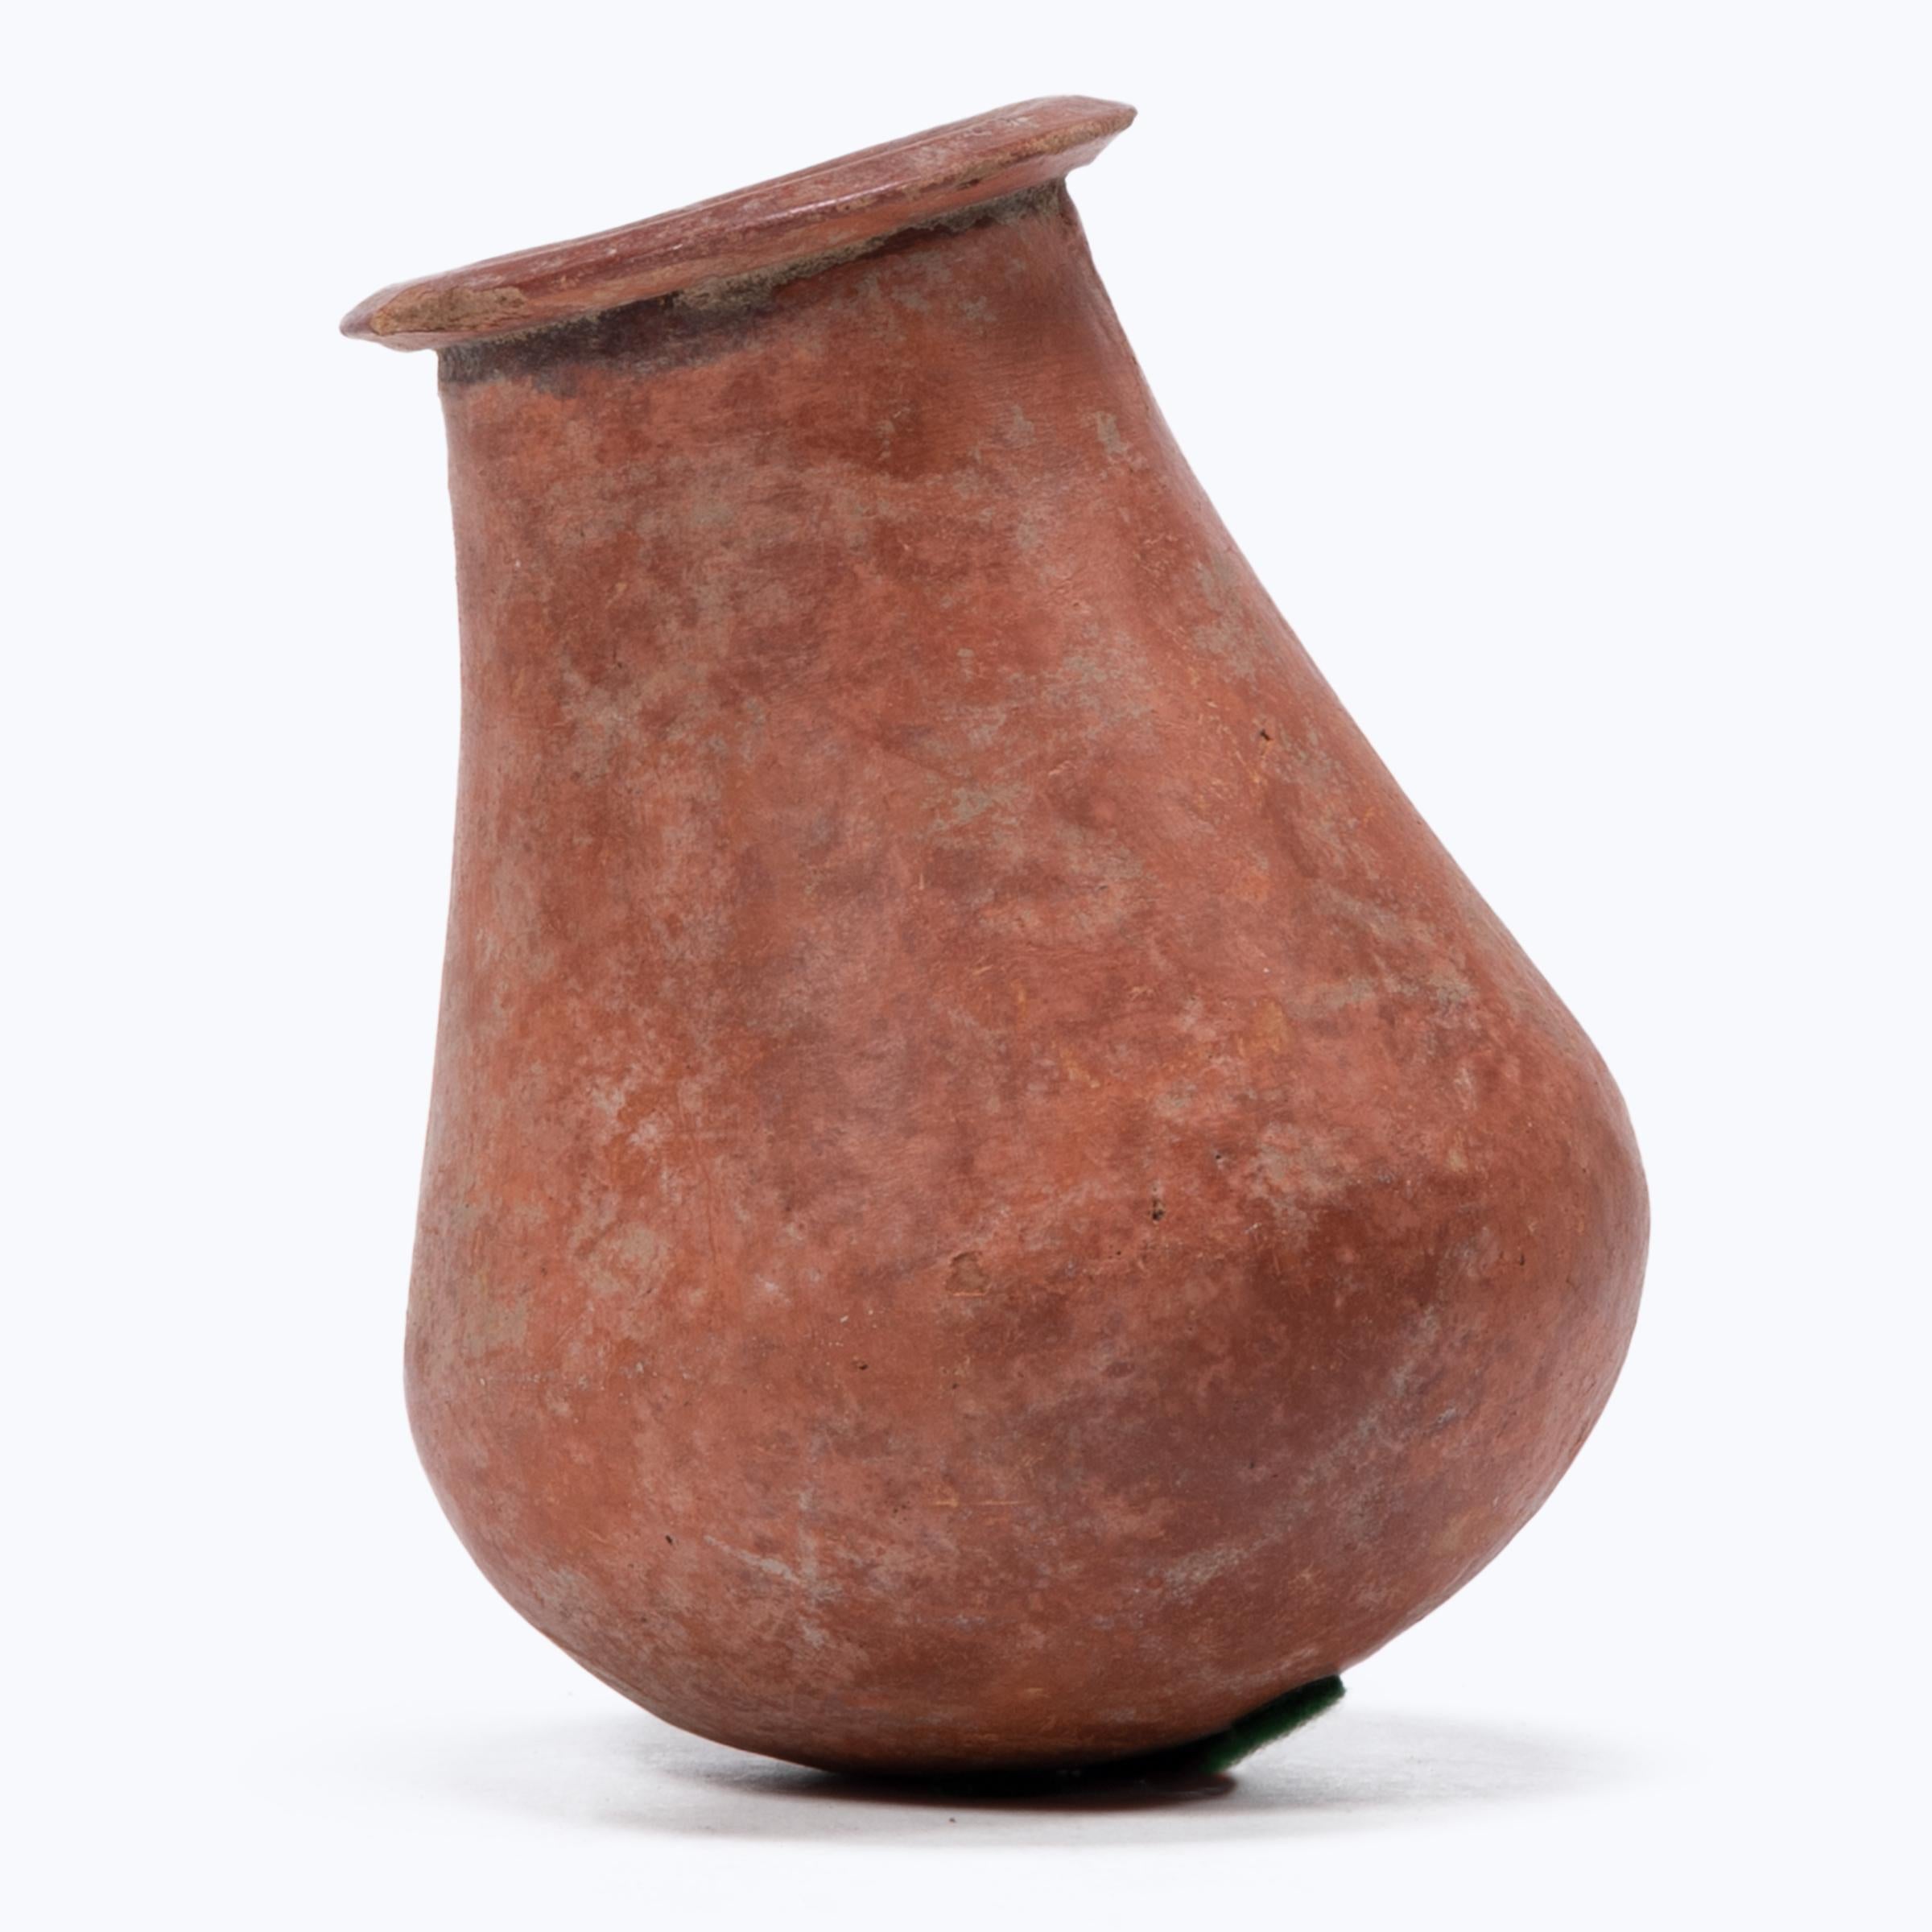 This petite hand-formed vessel bears a richly textured surface of worn red clay slip and dark smoke marks. Likely intended for everyday use, the simple bottle-form vessel reflects the skill of West African artisans, beautifully sculpted with